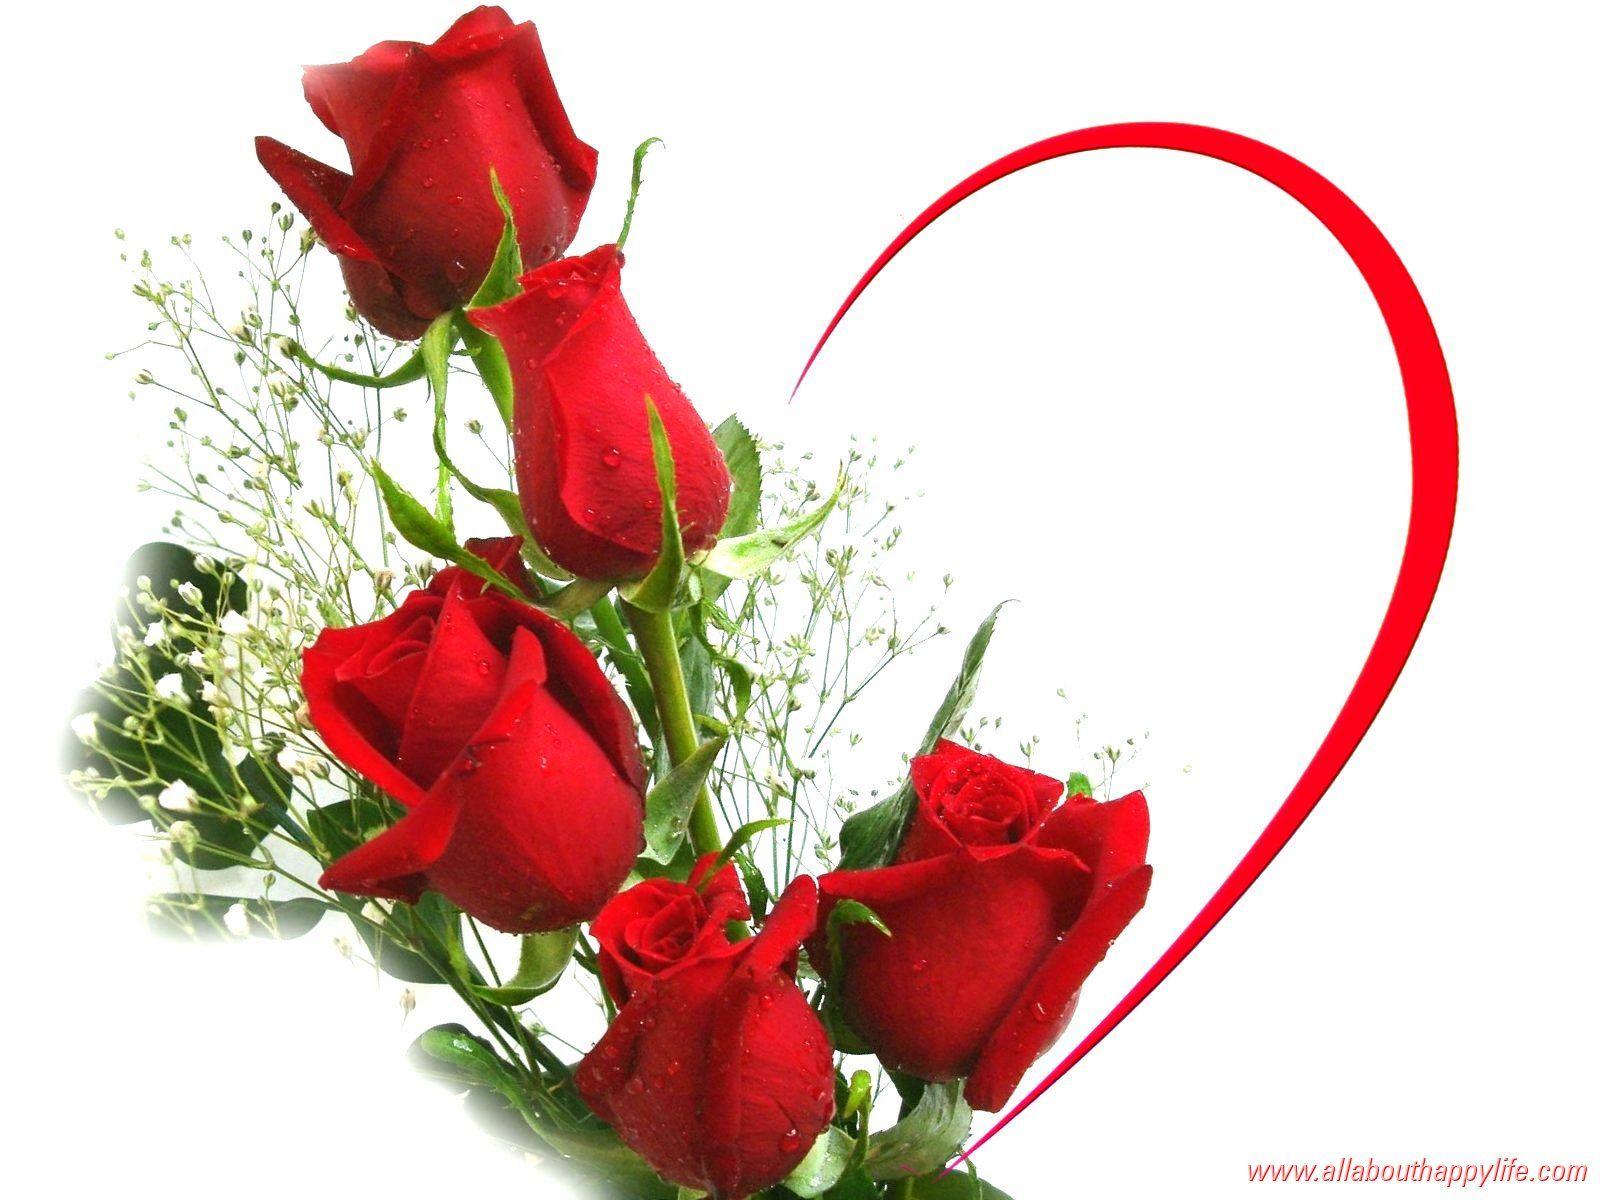 Red Rose Love Quality Wallpaper. High Quality Wallpaper